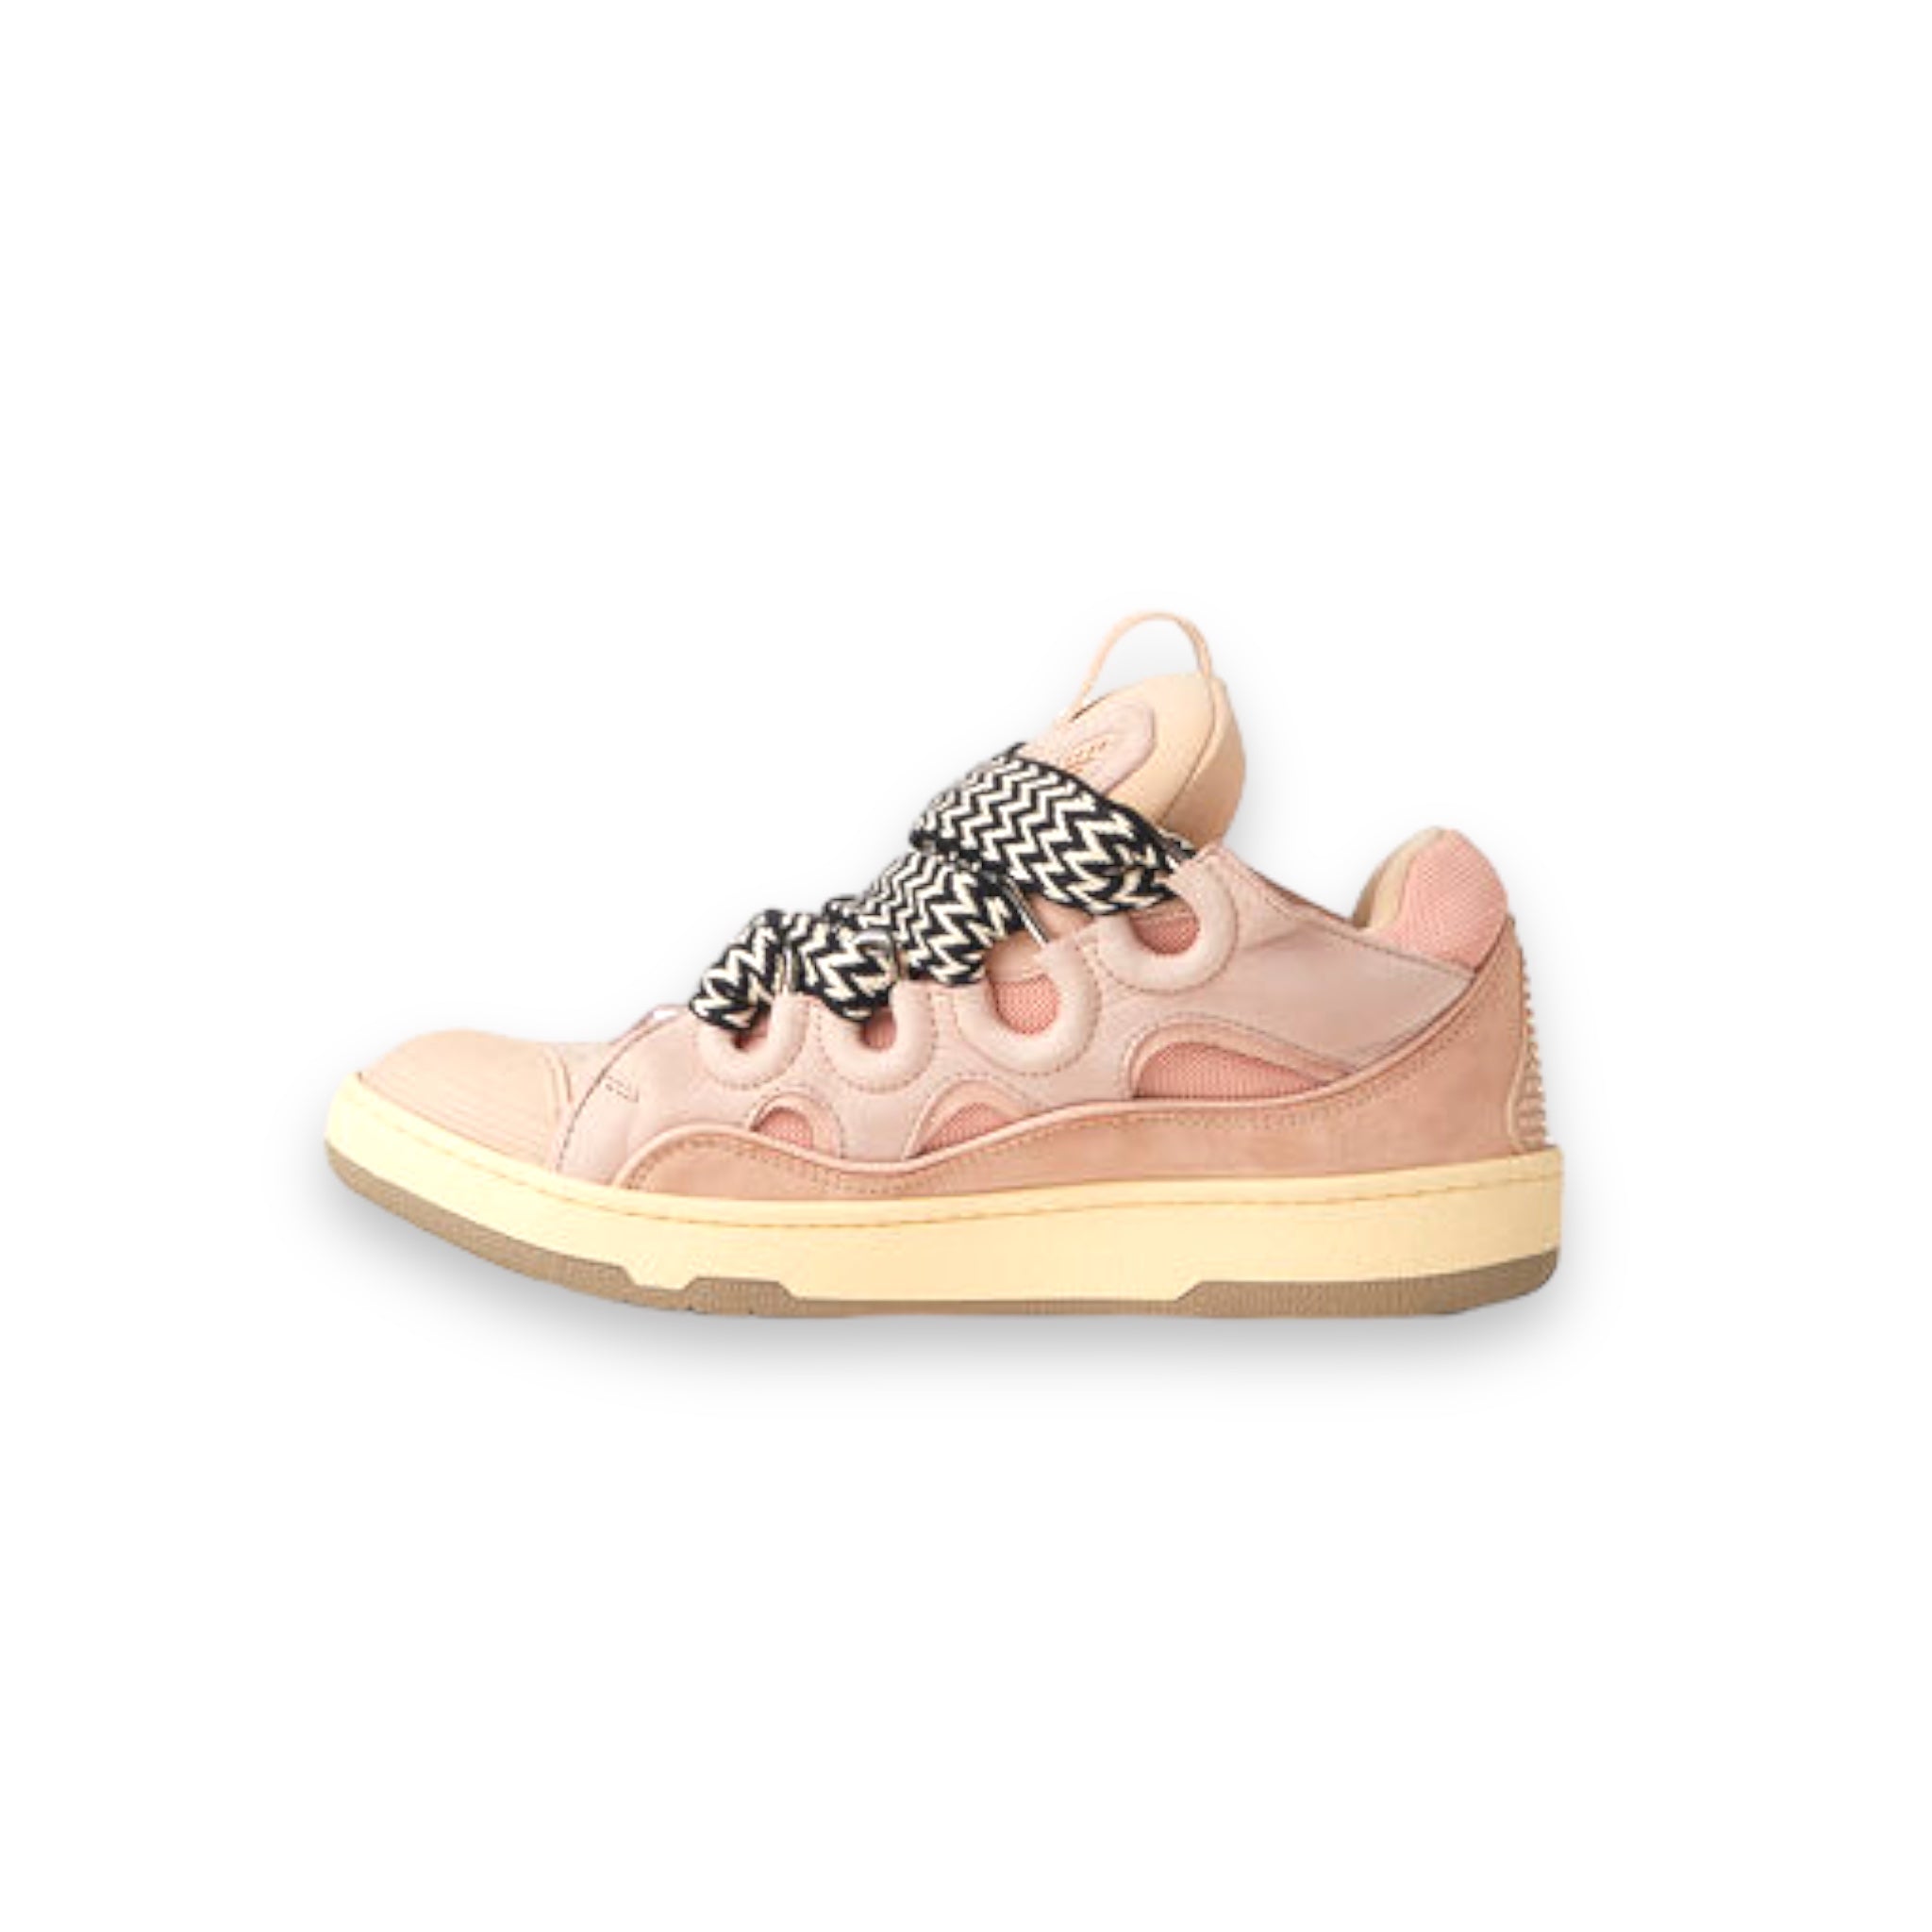 Lanvin Curb Pink Sneakers